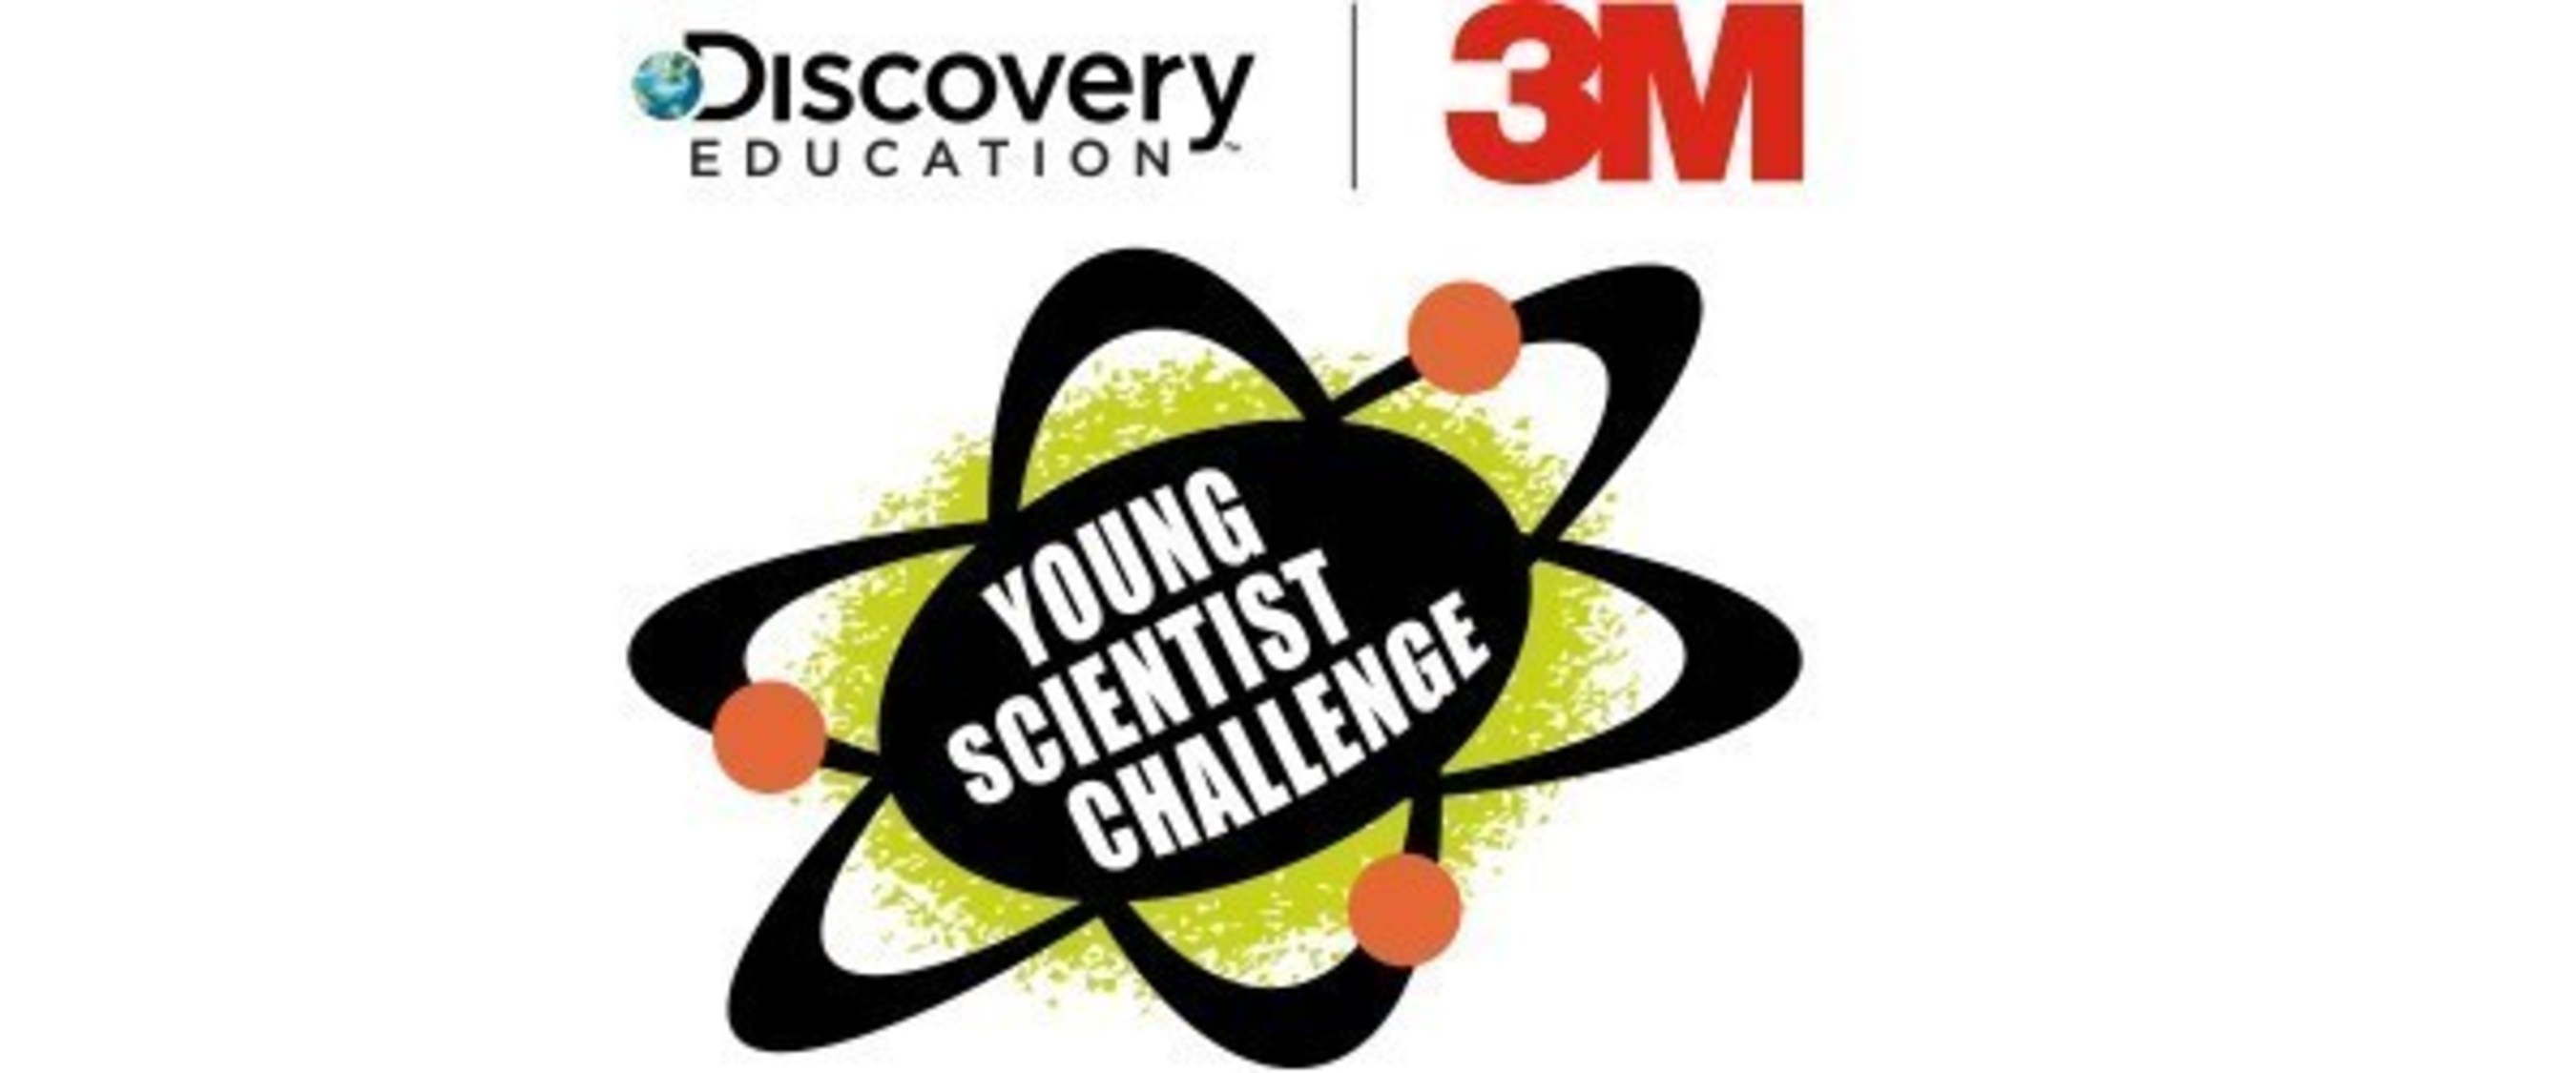 Discovery Education 3M Young Scientist Challenge (PRNewsFoto/Discovery Education)